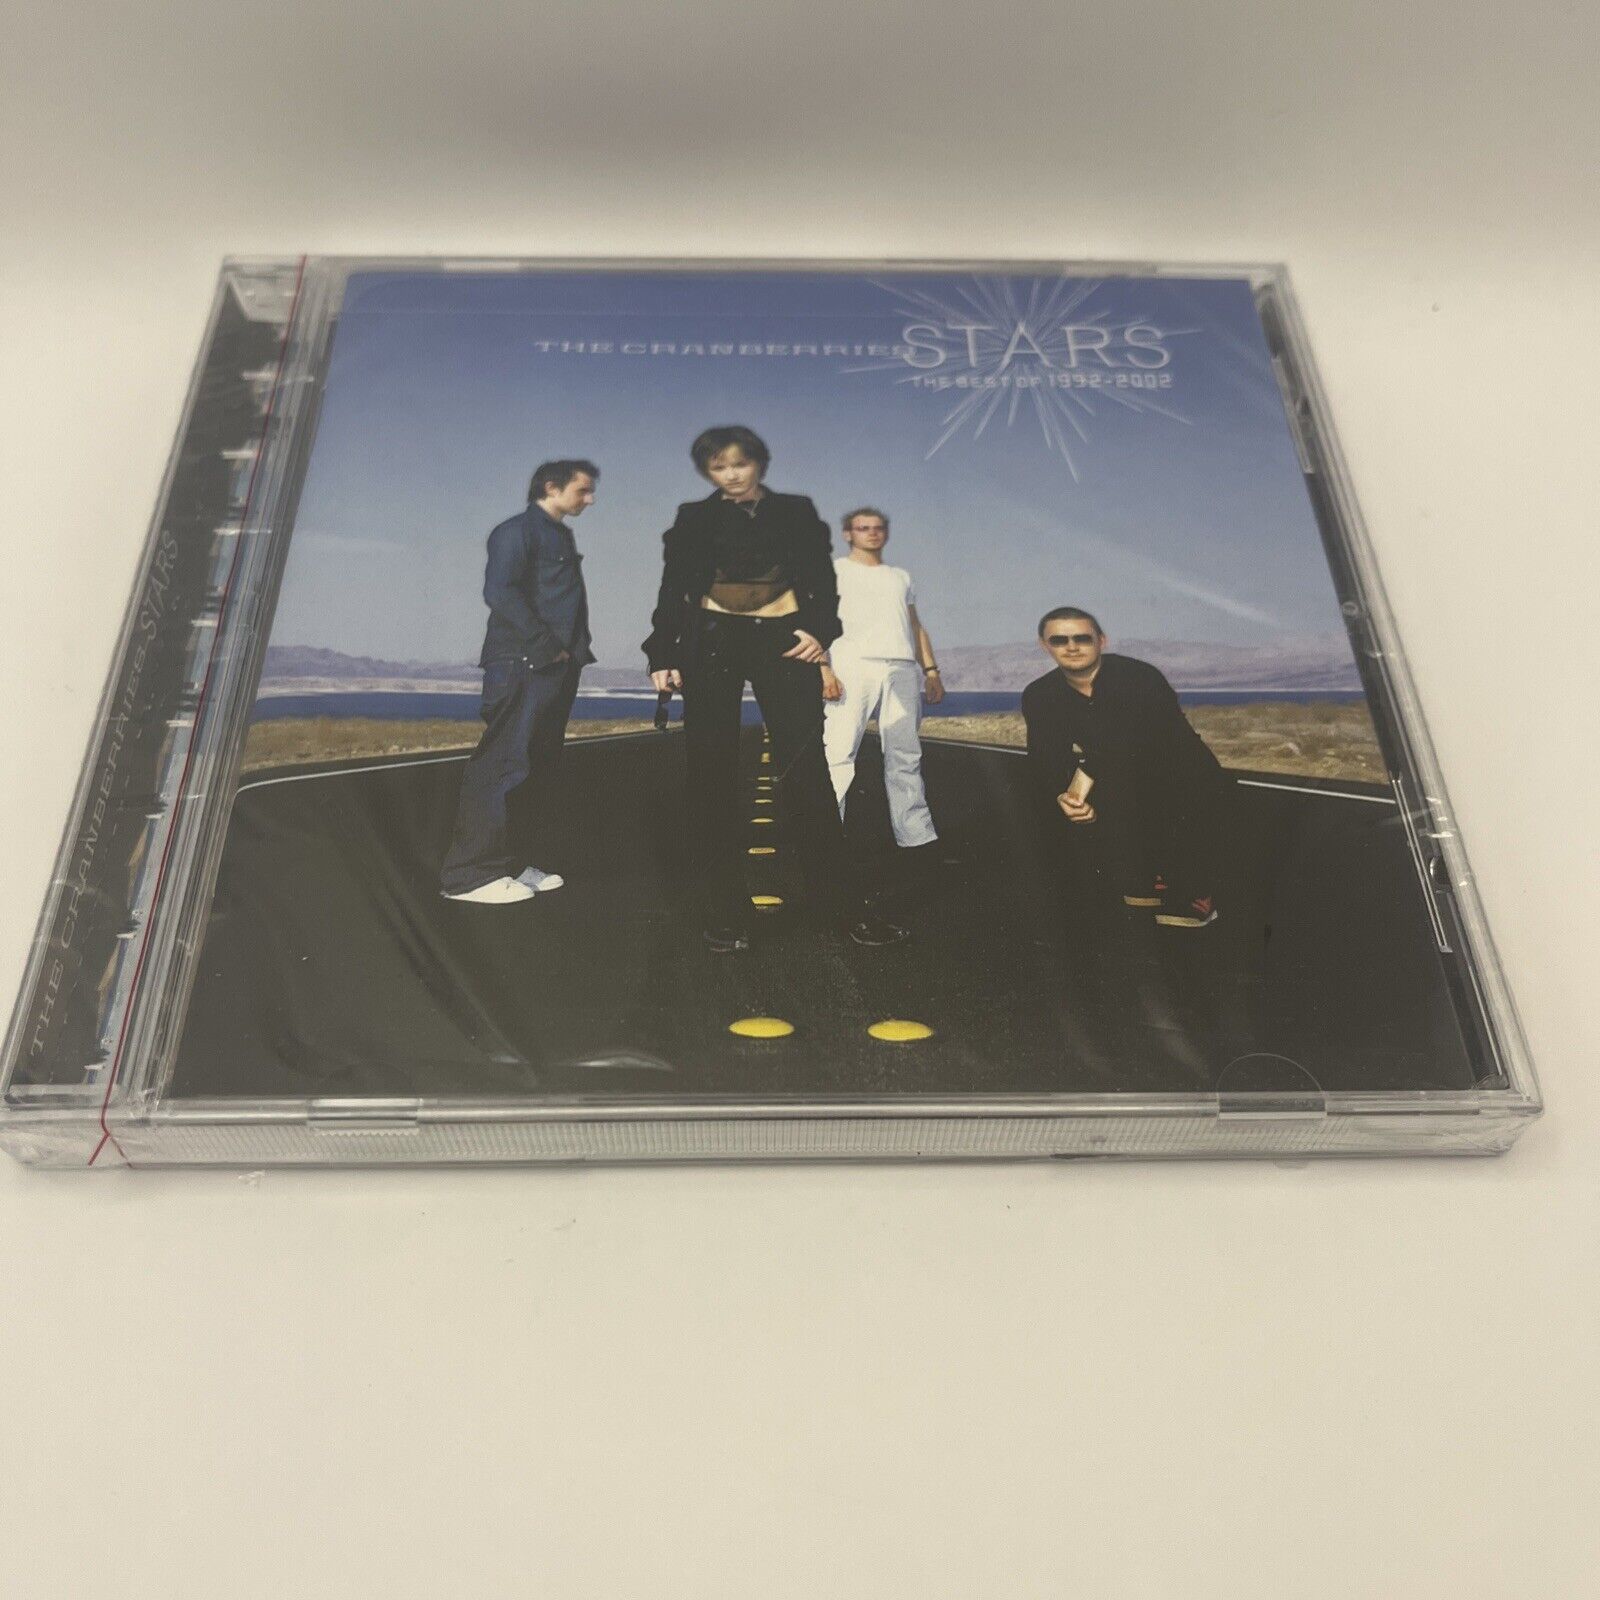 Stars: The Best of 1992-2002 by Cranberries (CD, 2002) NEW Sealed!